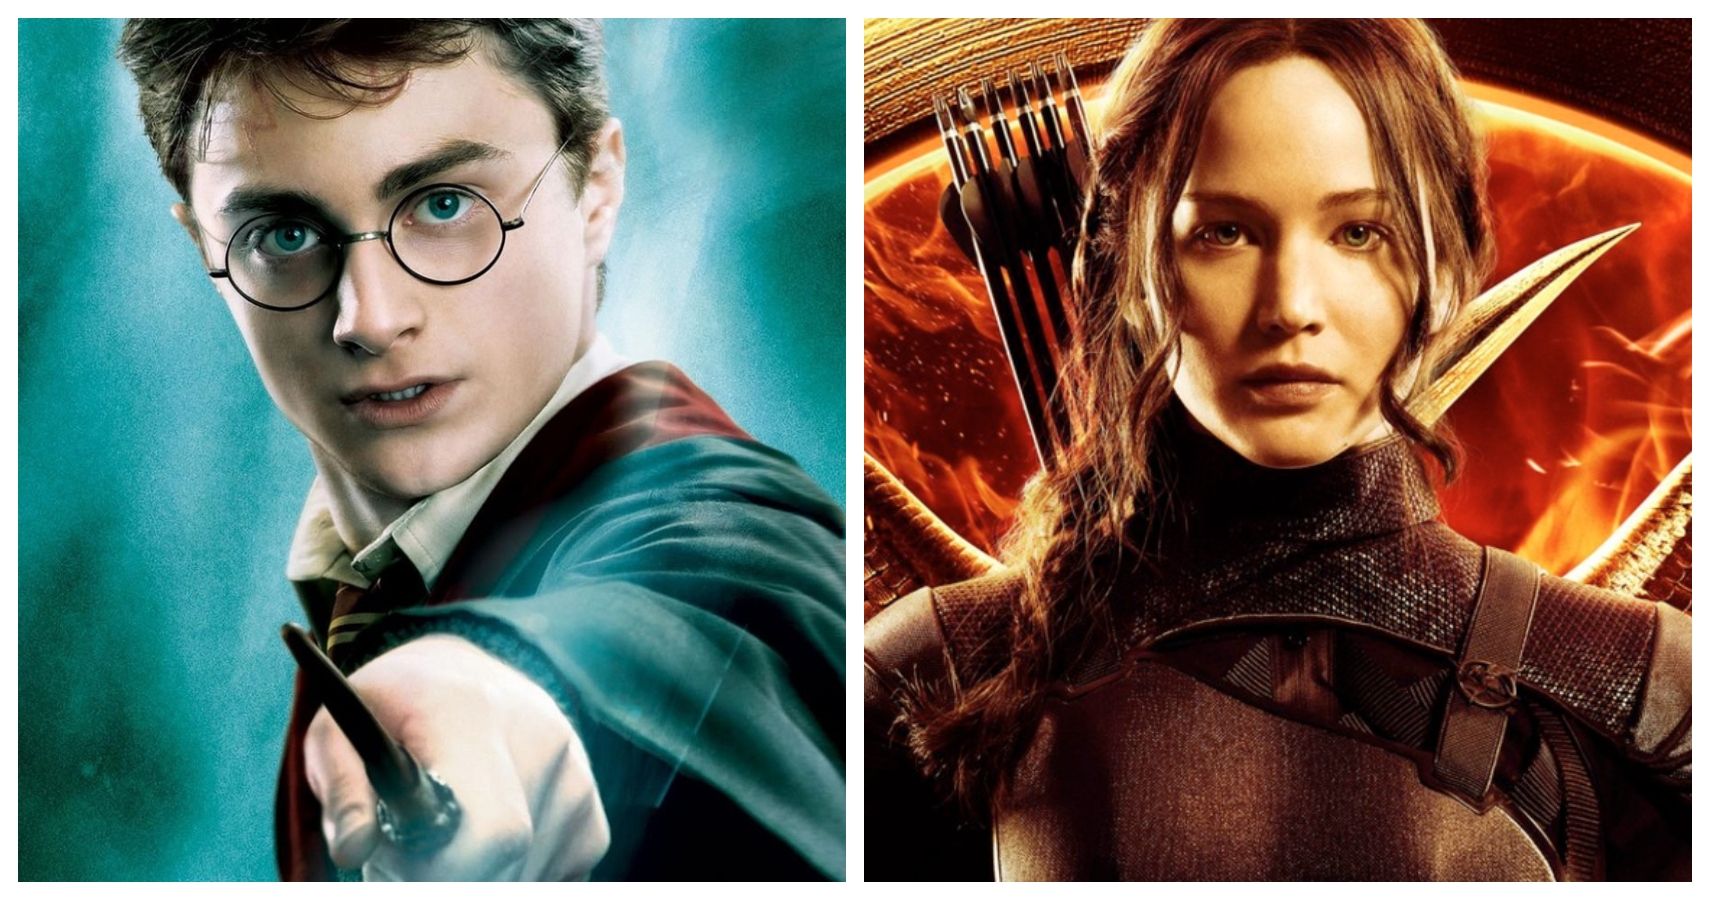 The Hunger Games The Main Characters & Their Harry Potter Counterpart